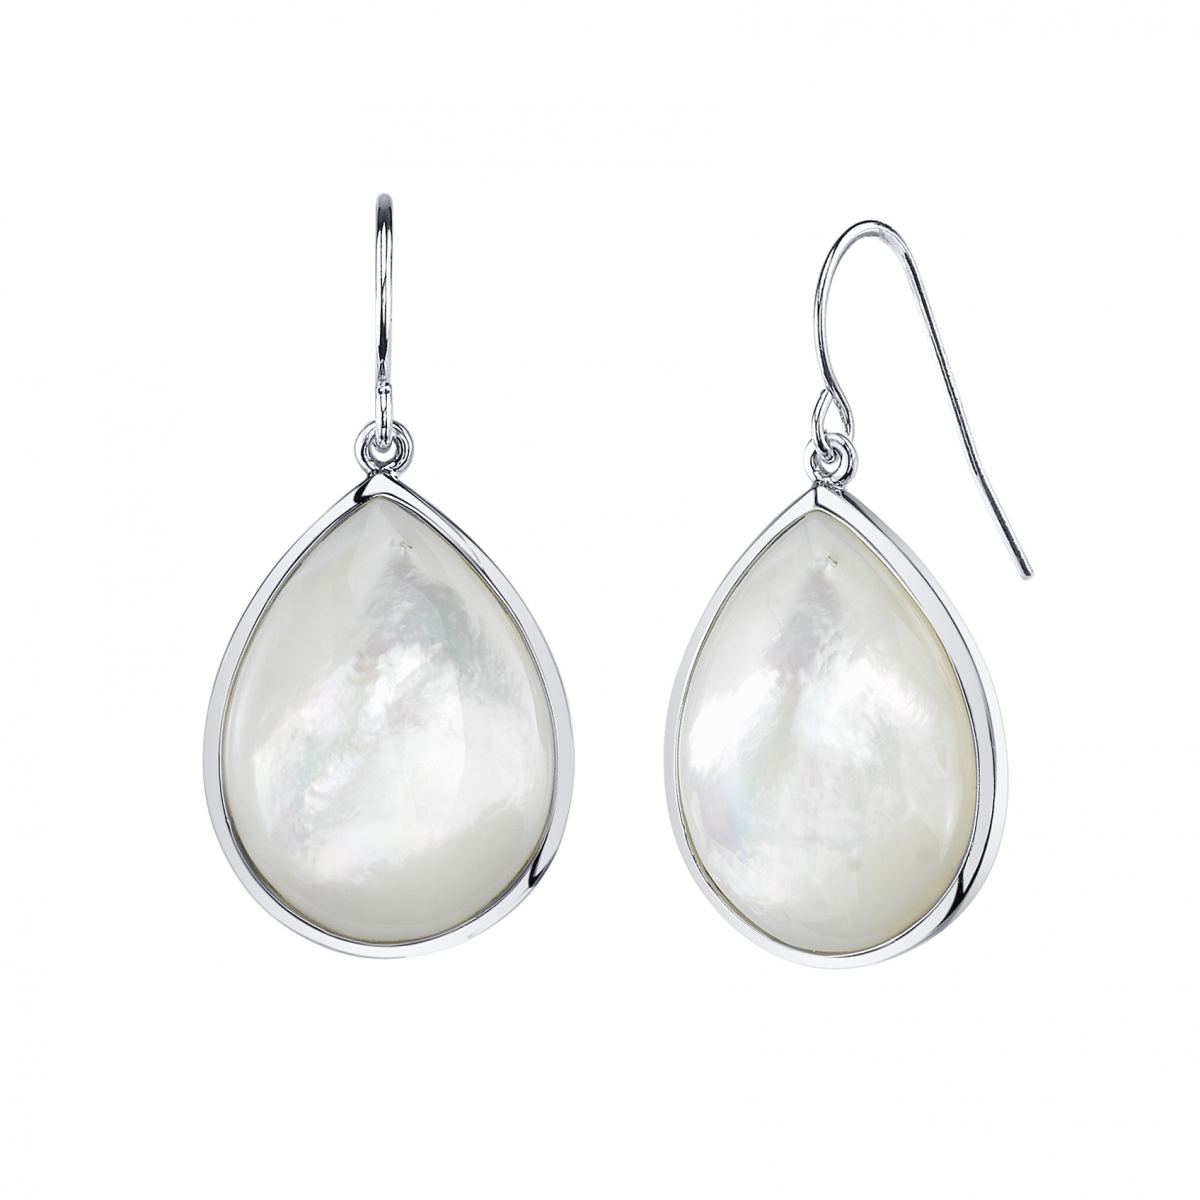 White Mother of Pearl Mave Earrings